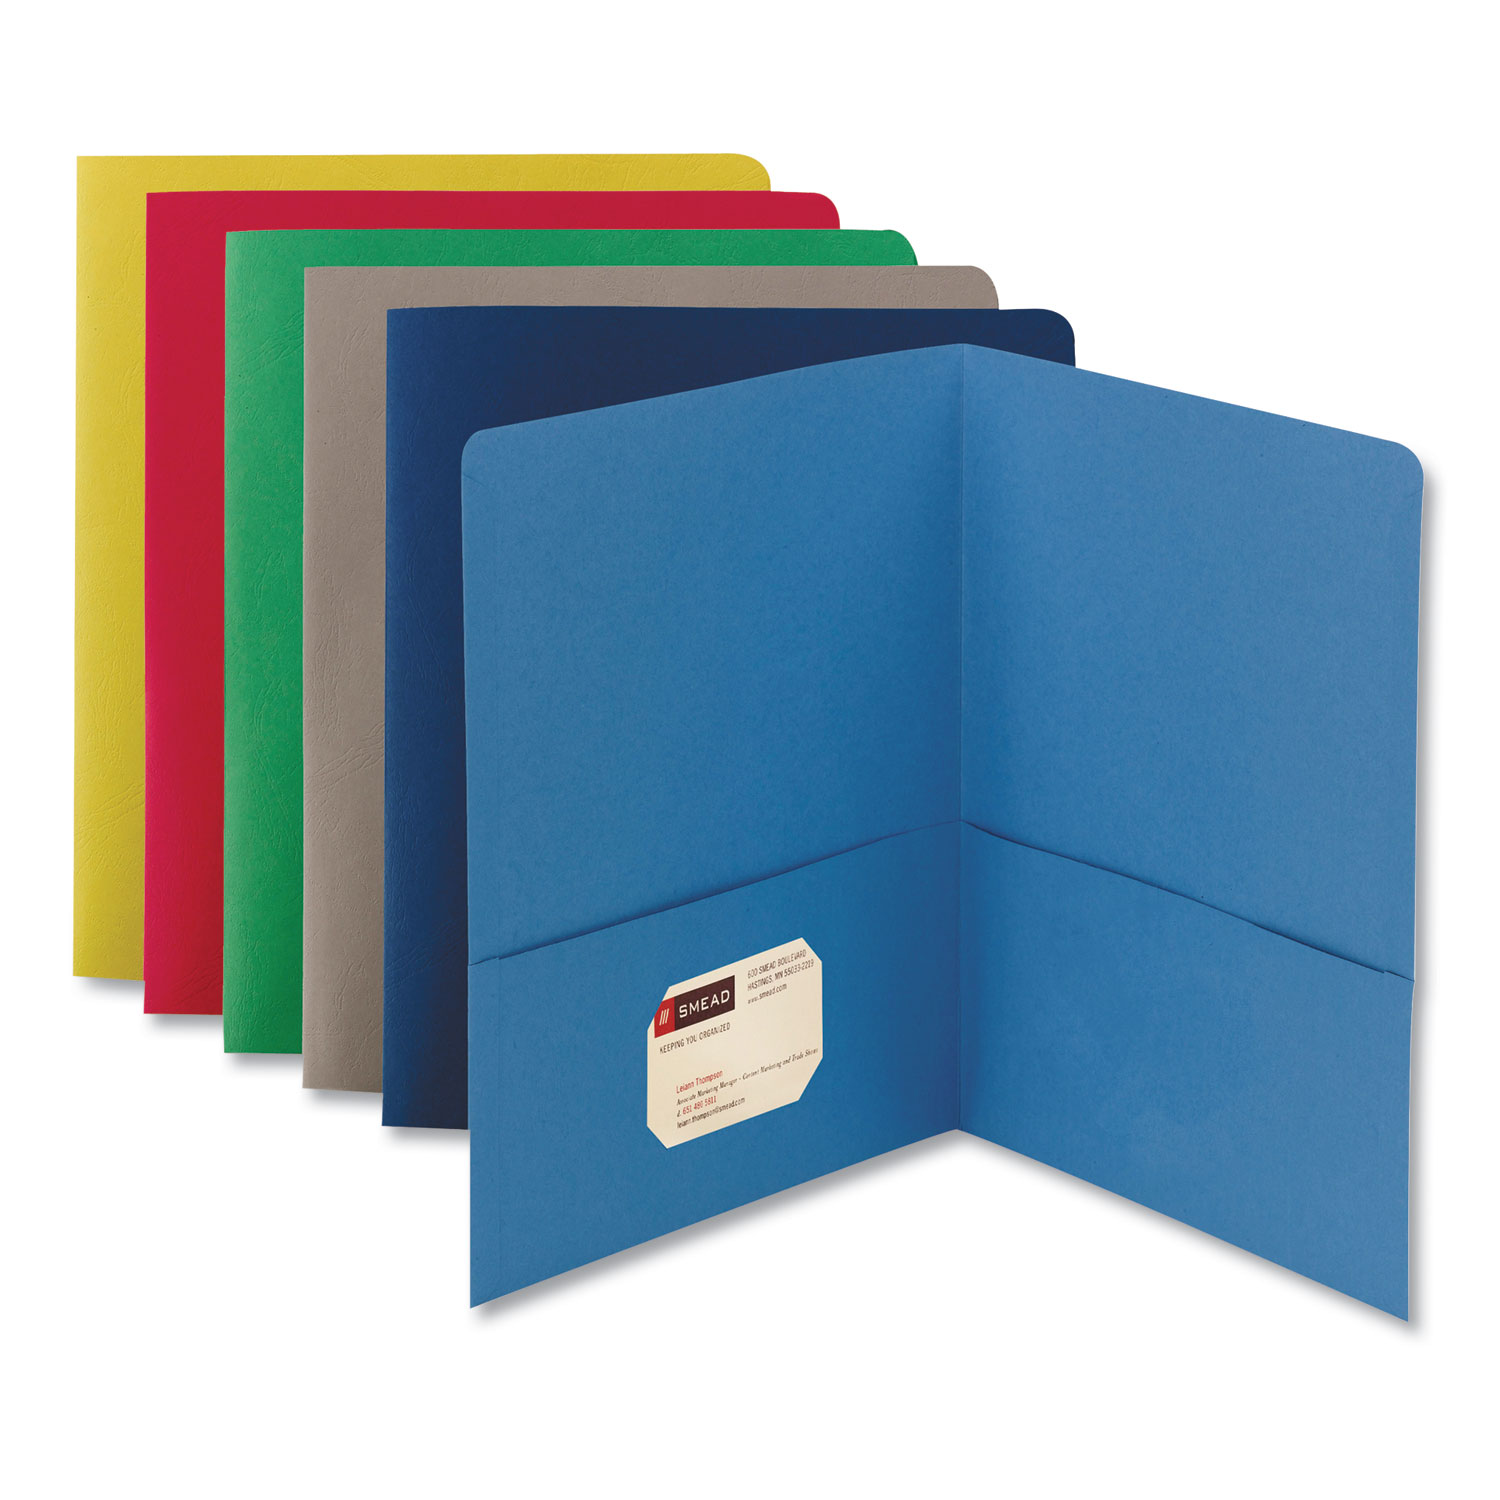 Textured Paper Box of 25 Red Twin-Pocket Folders New 57511EE Holds 100 Sheets Letter Size 